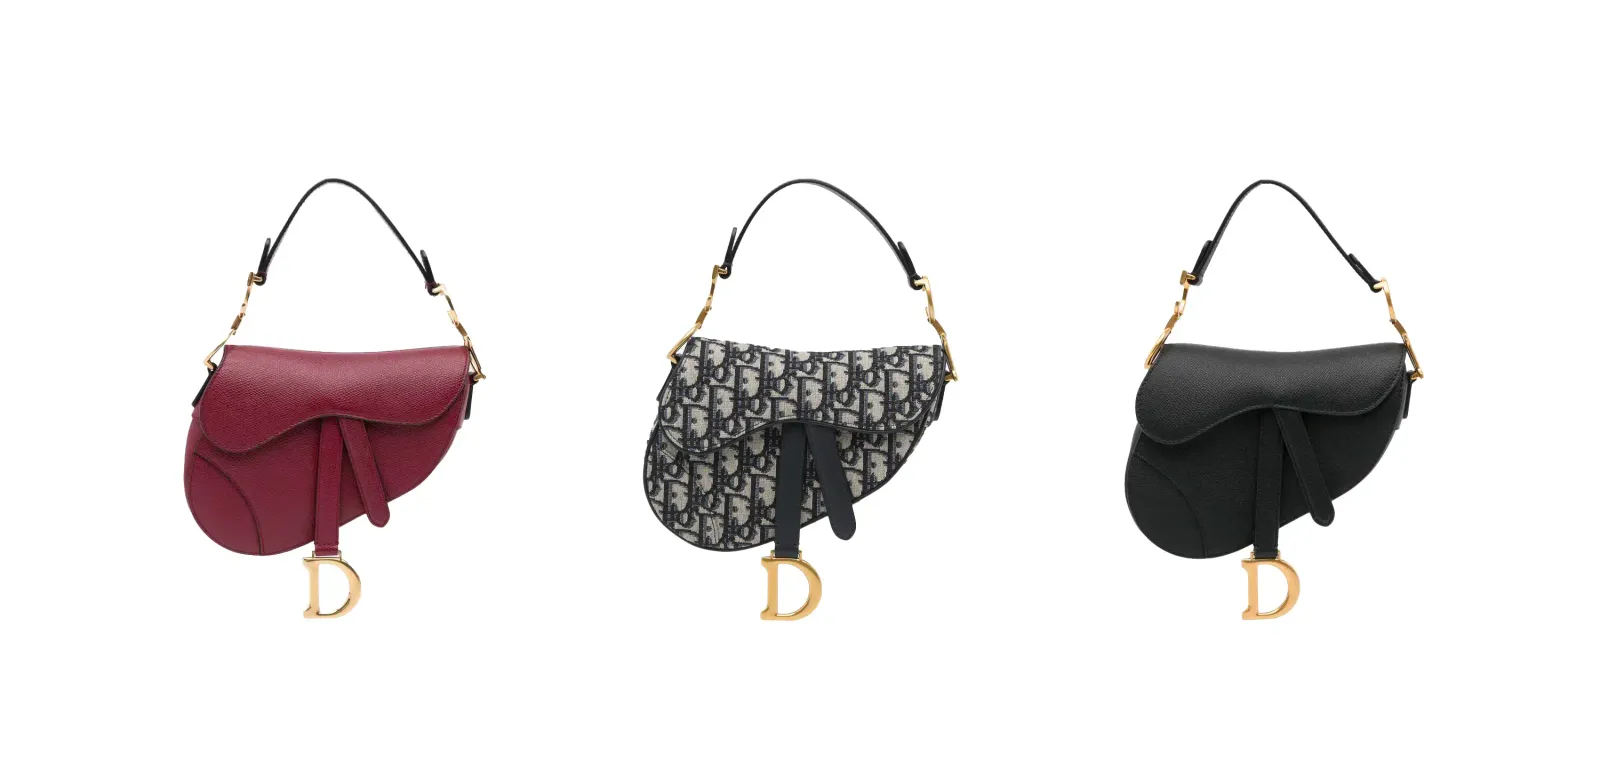 Dior saddle bags in red, oblique jacquard and black leather